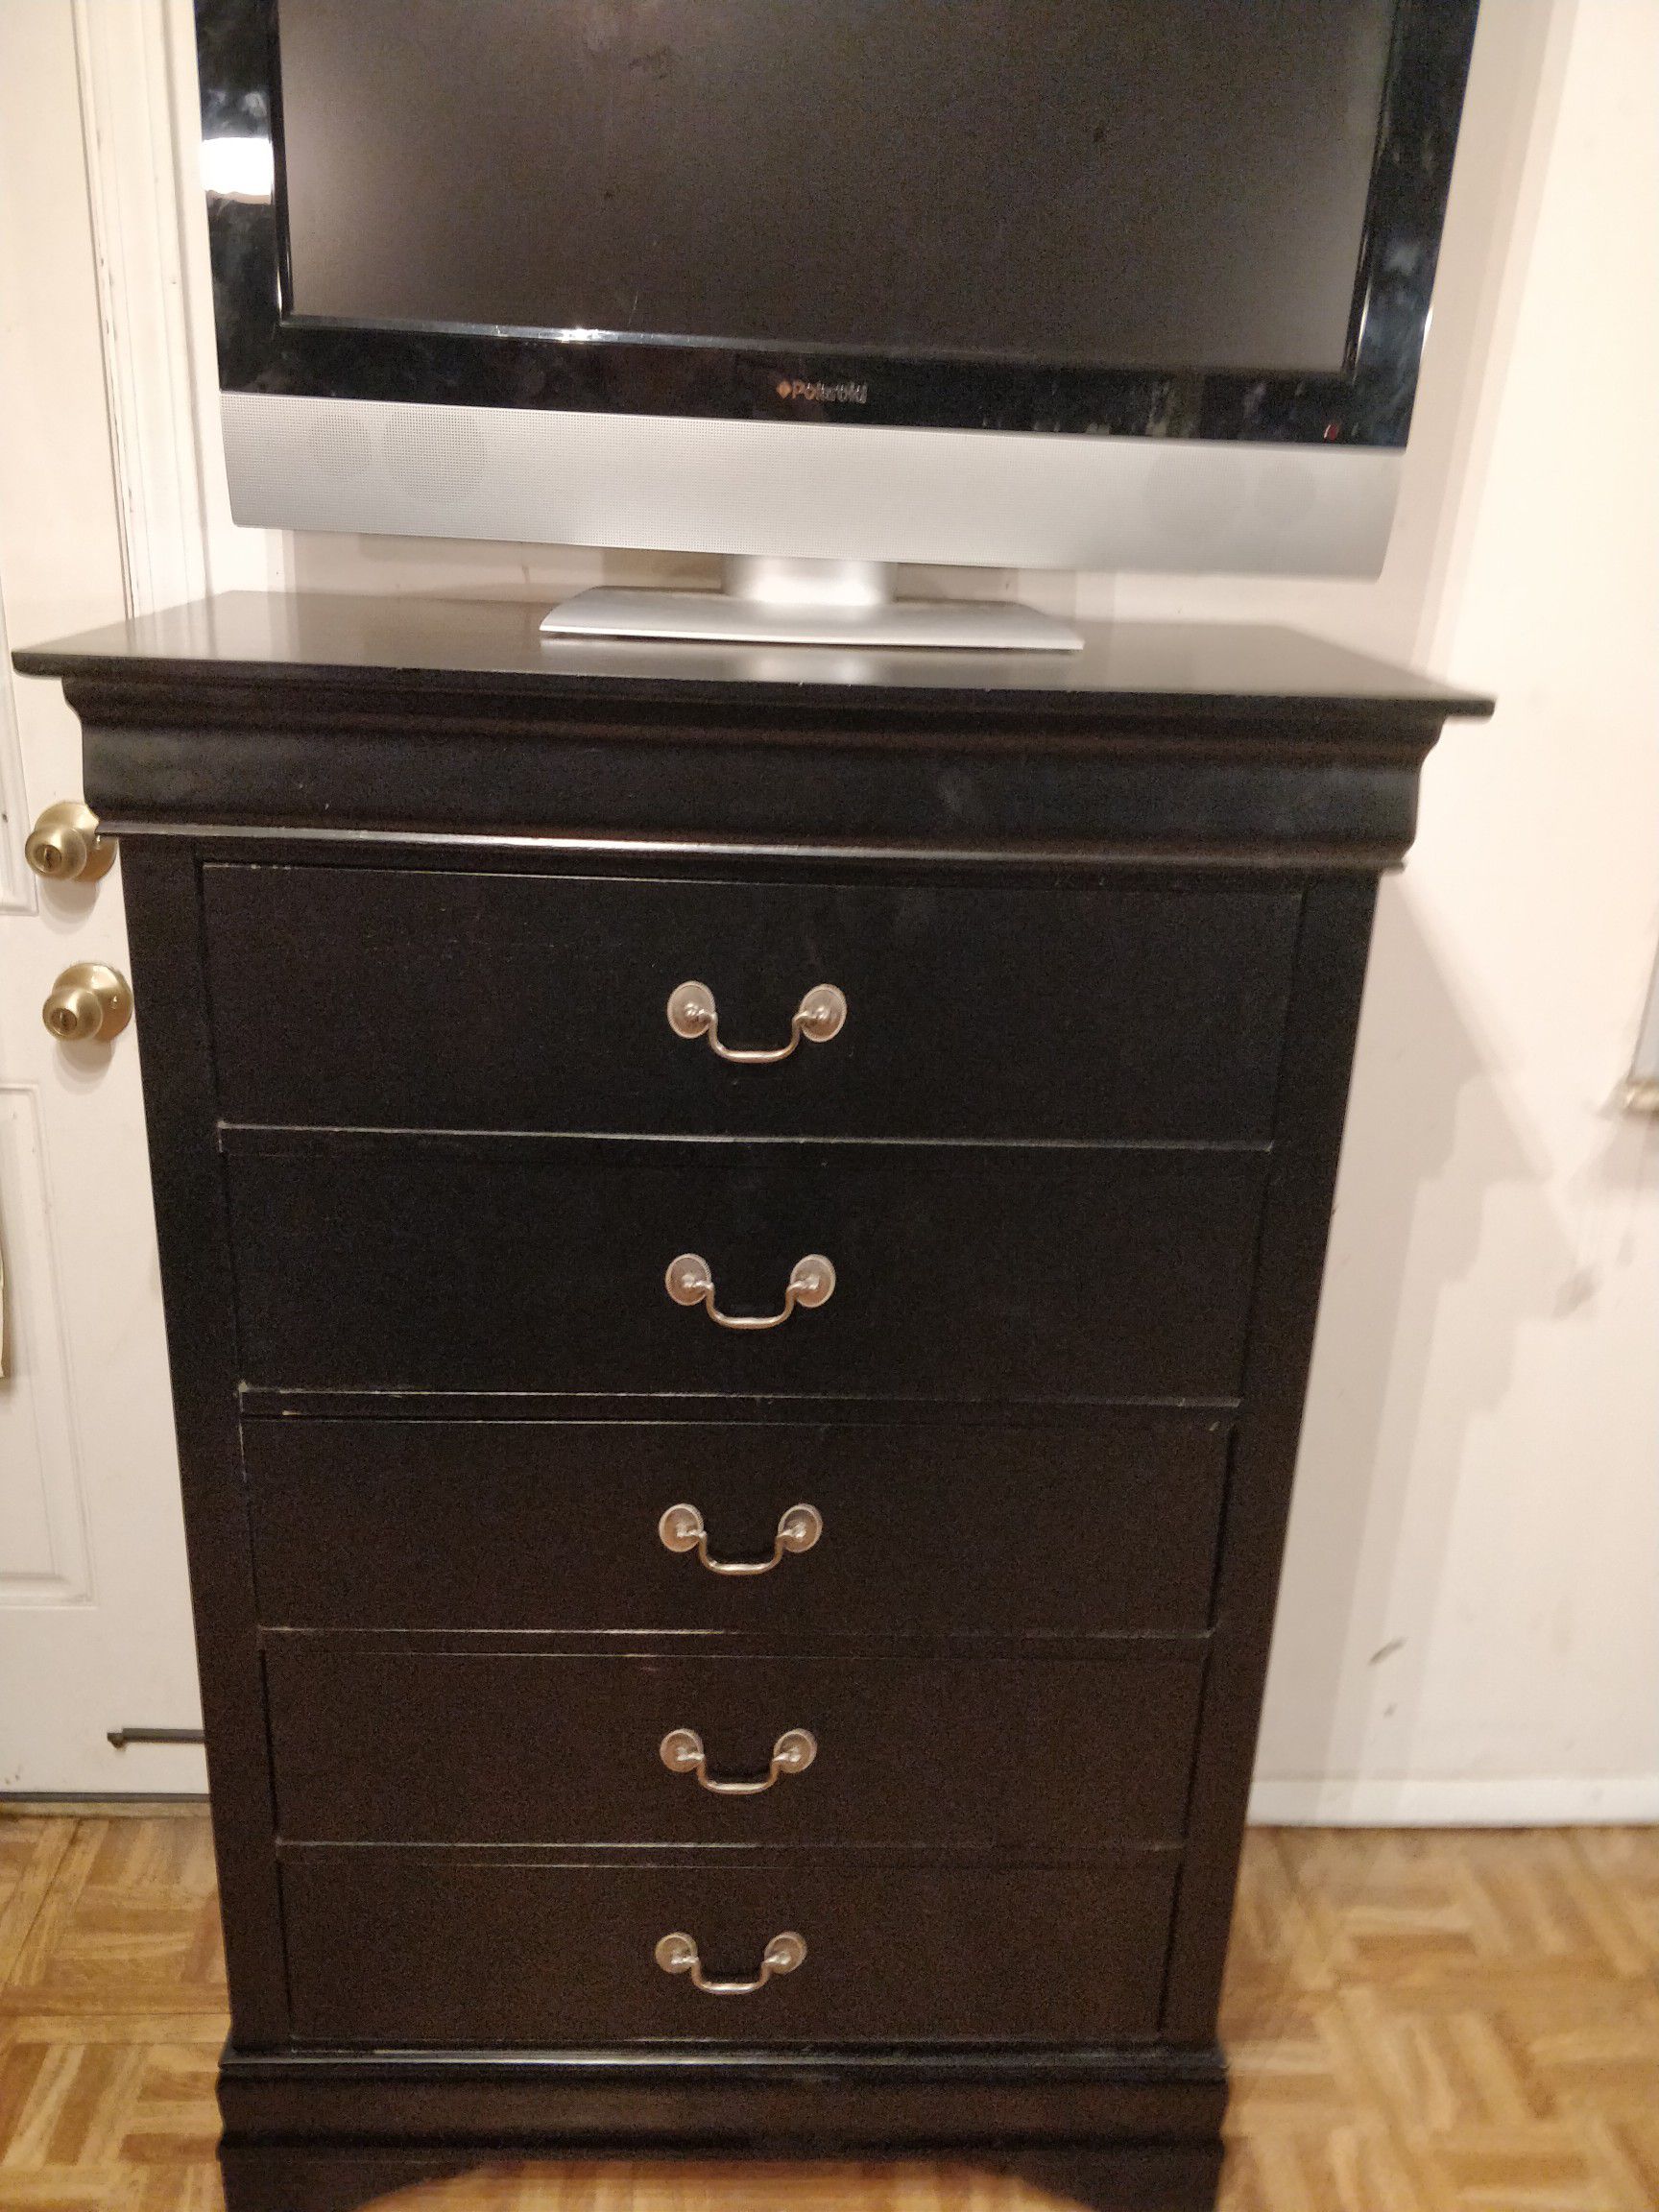 Like new black chest dresser in great condition, all drawers sliding smoothly, pet free smoke free. L33"*W17.8"*H48"